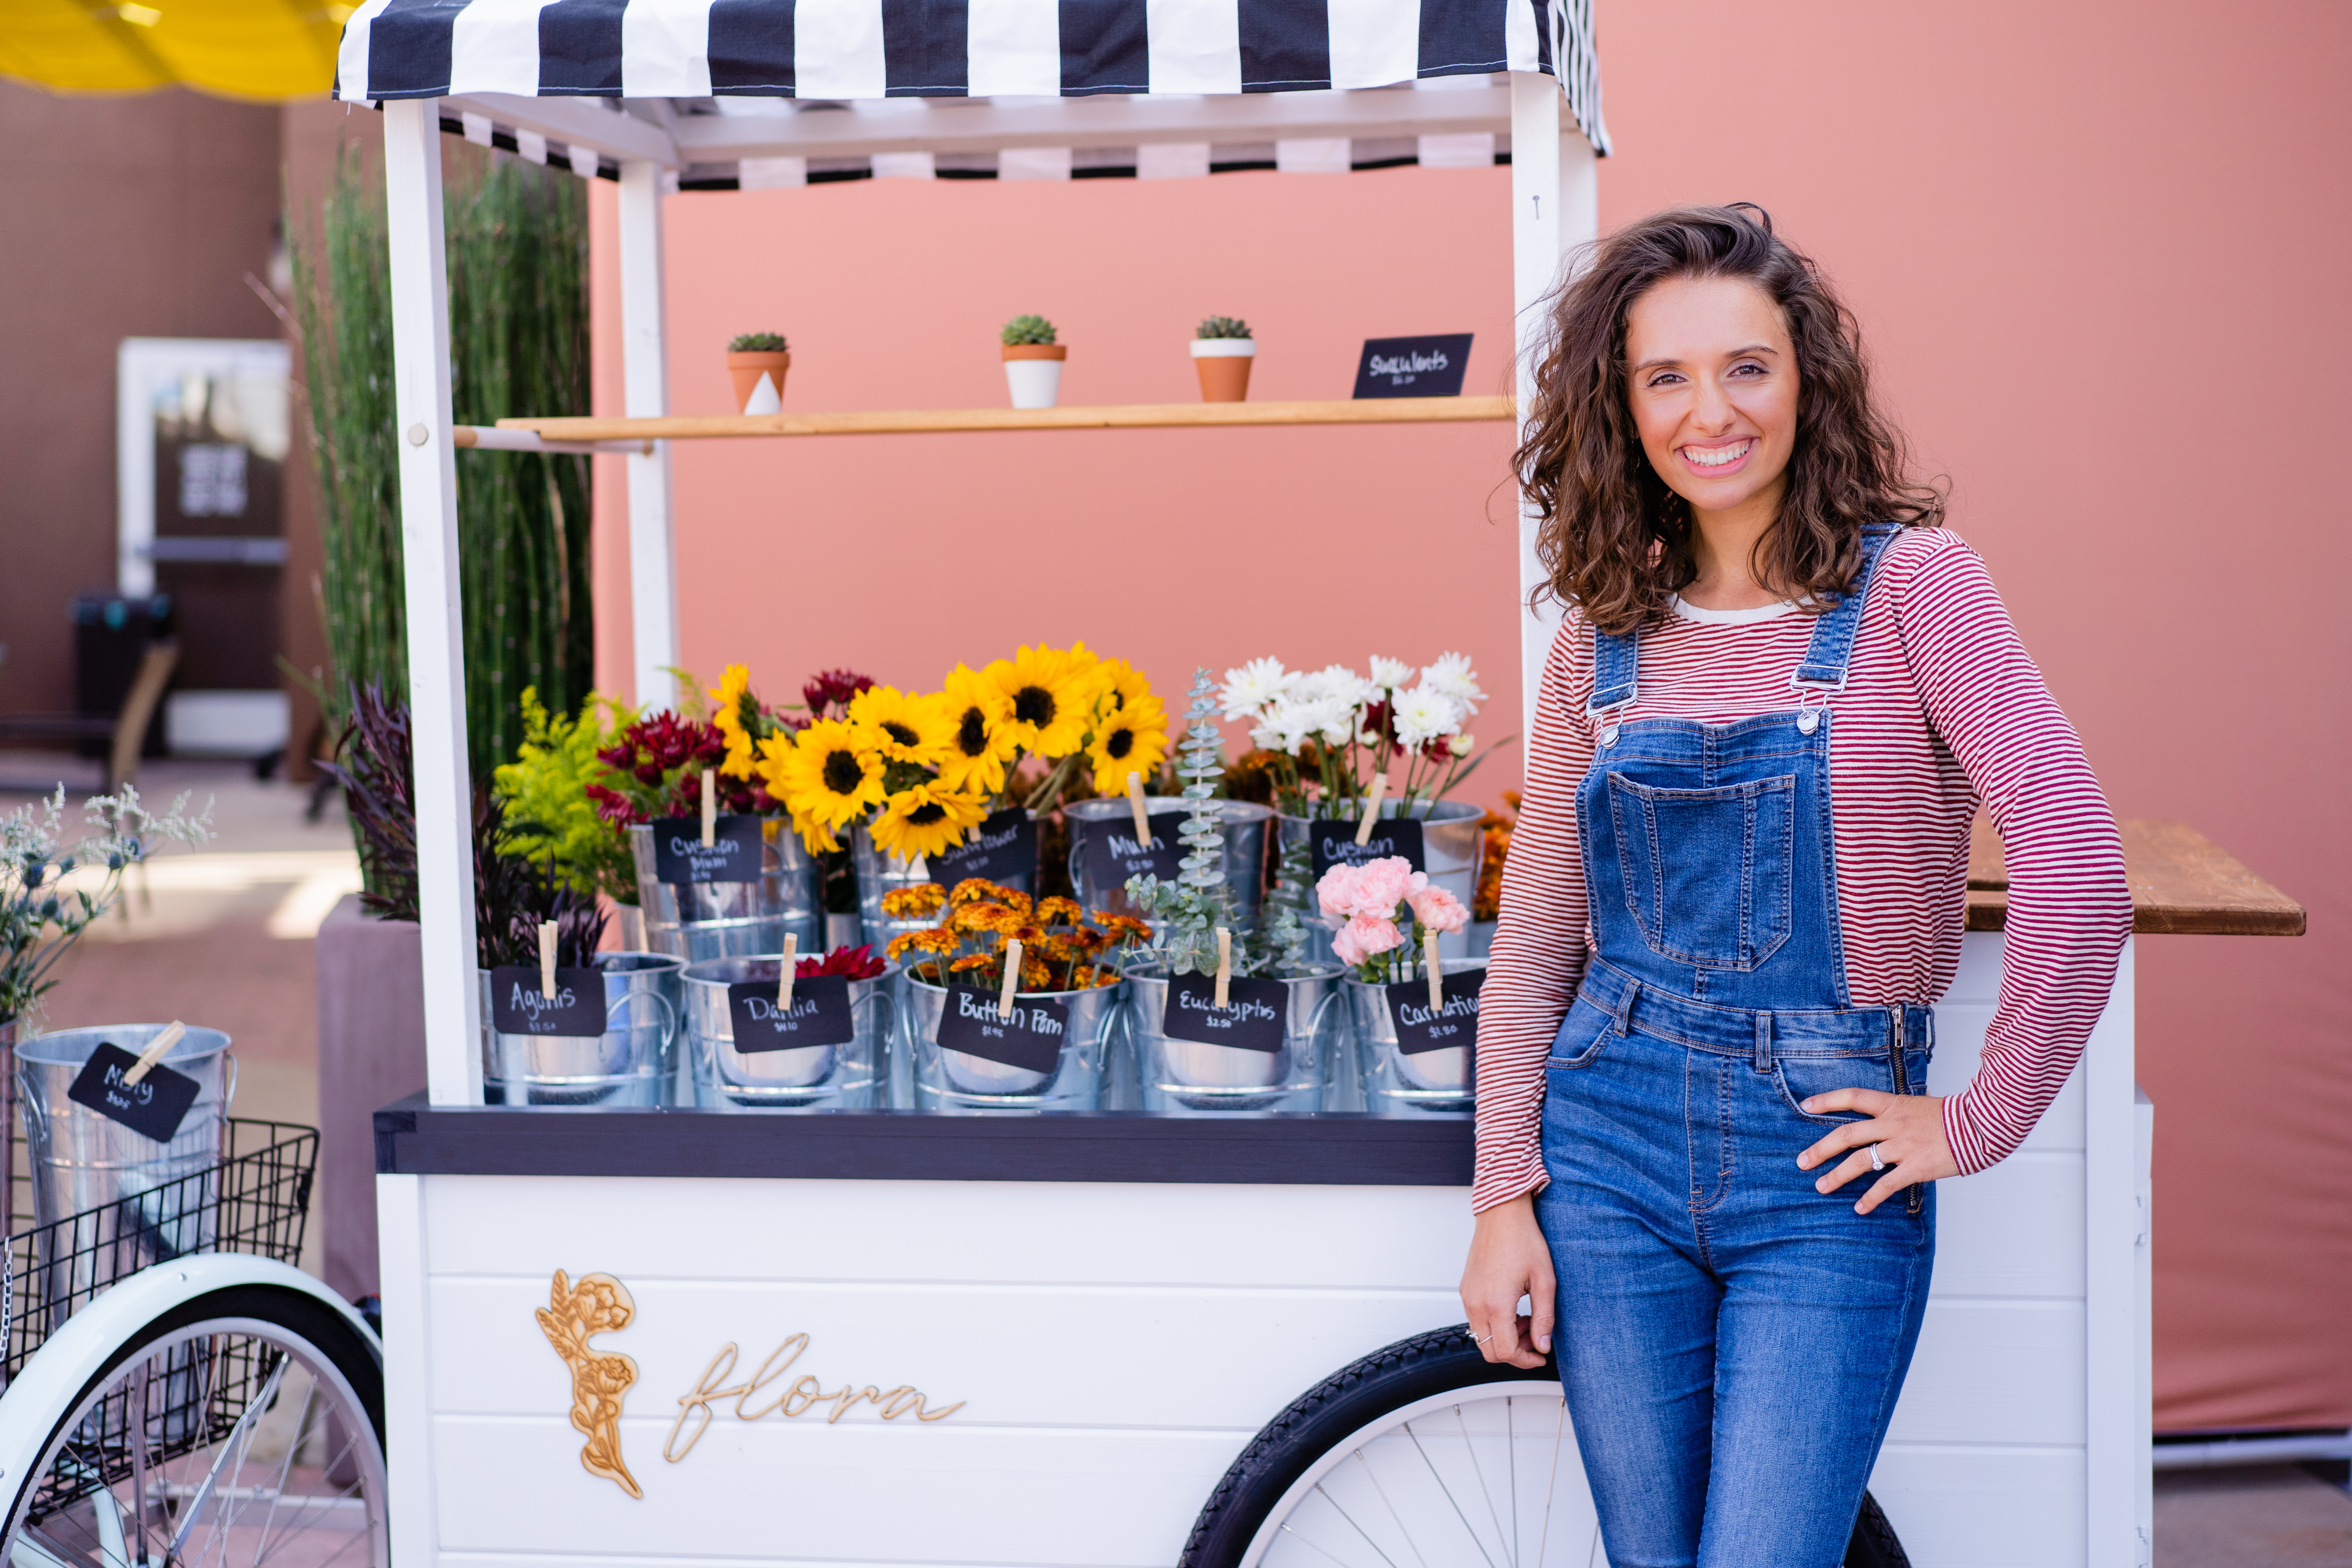 flora flower cart with red brick photo booth